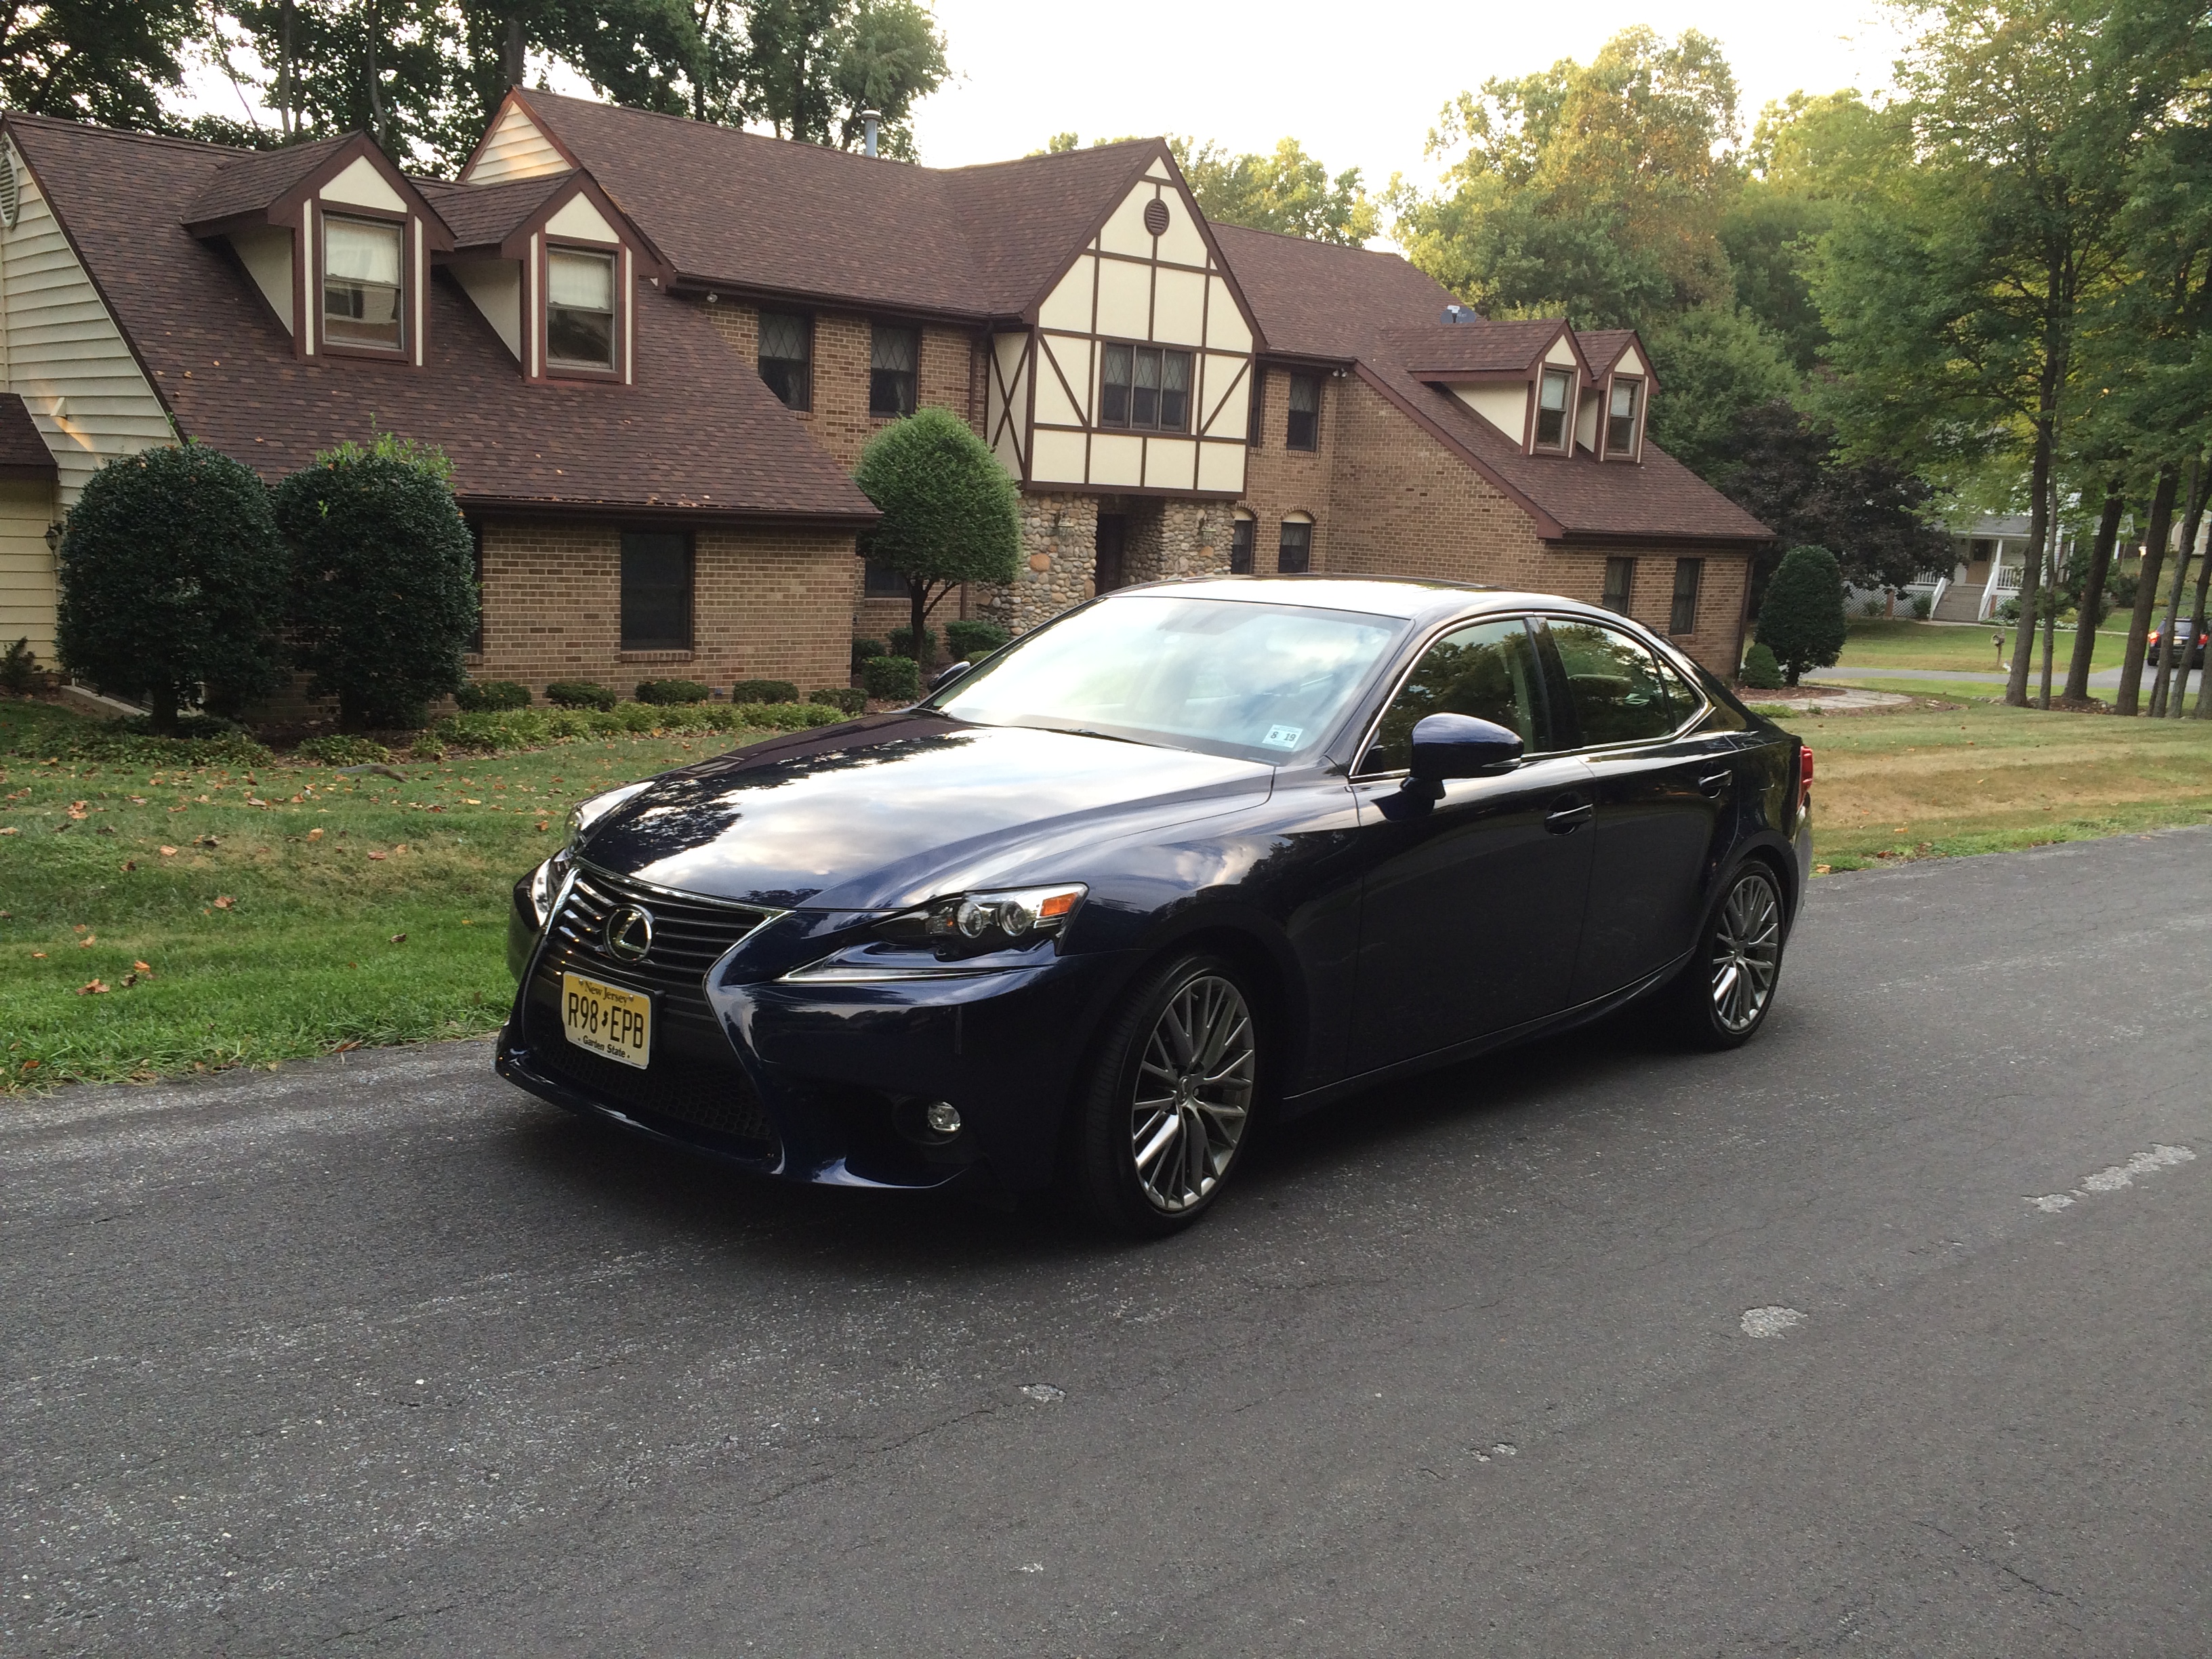 Car Report: Lexus IS250 is a small luxury sedan with a rare V6